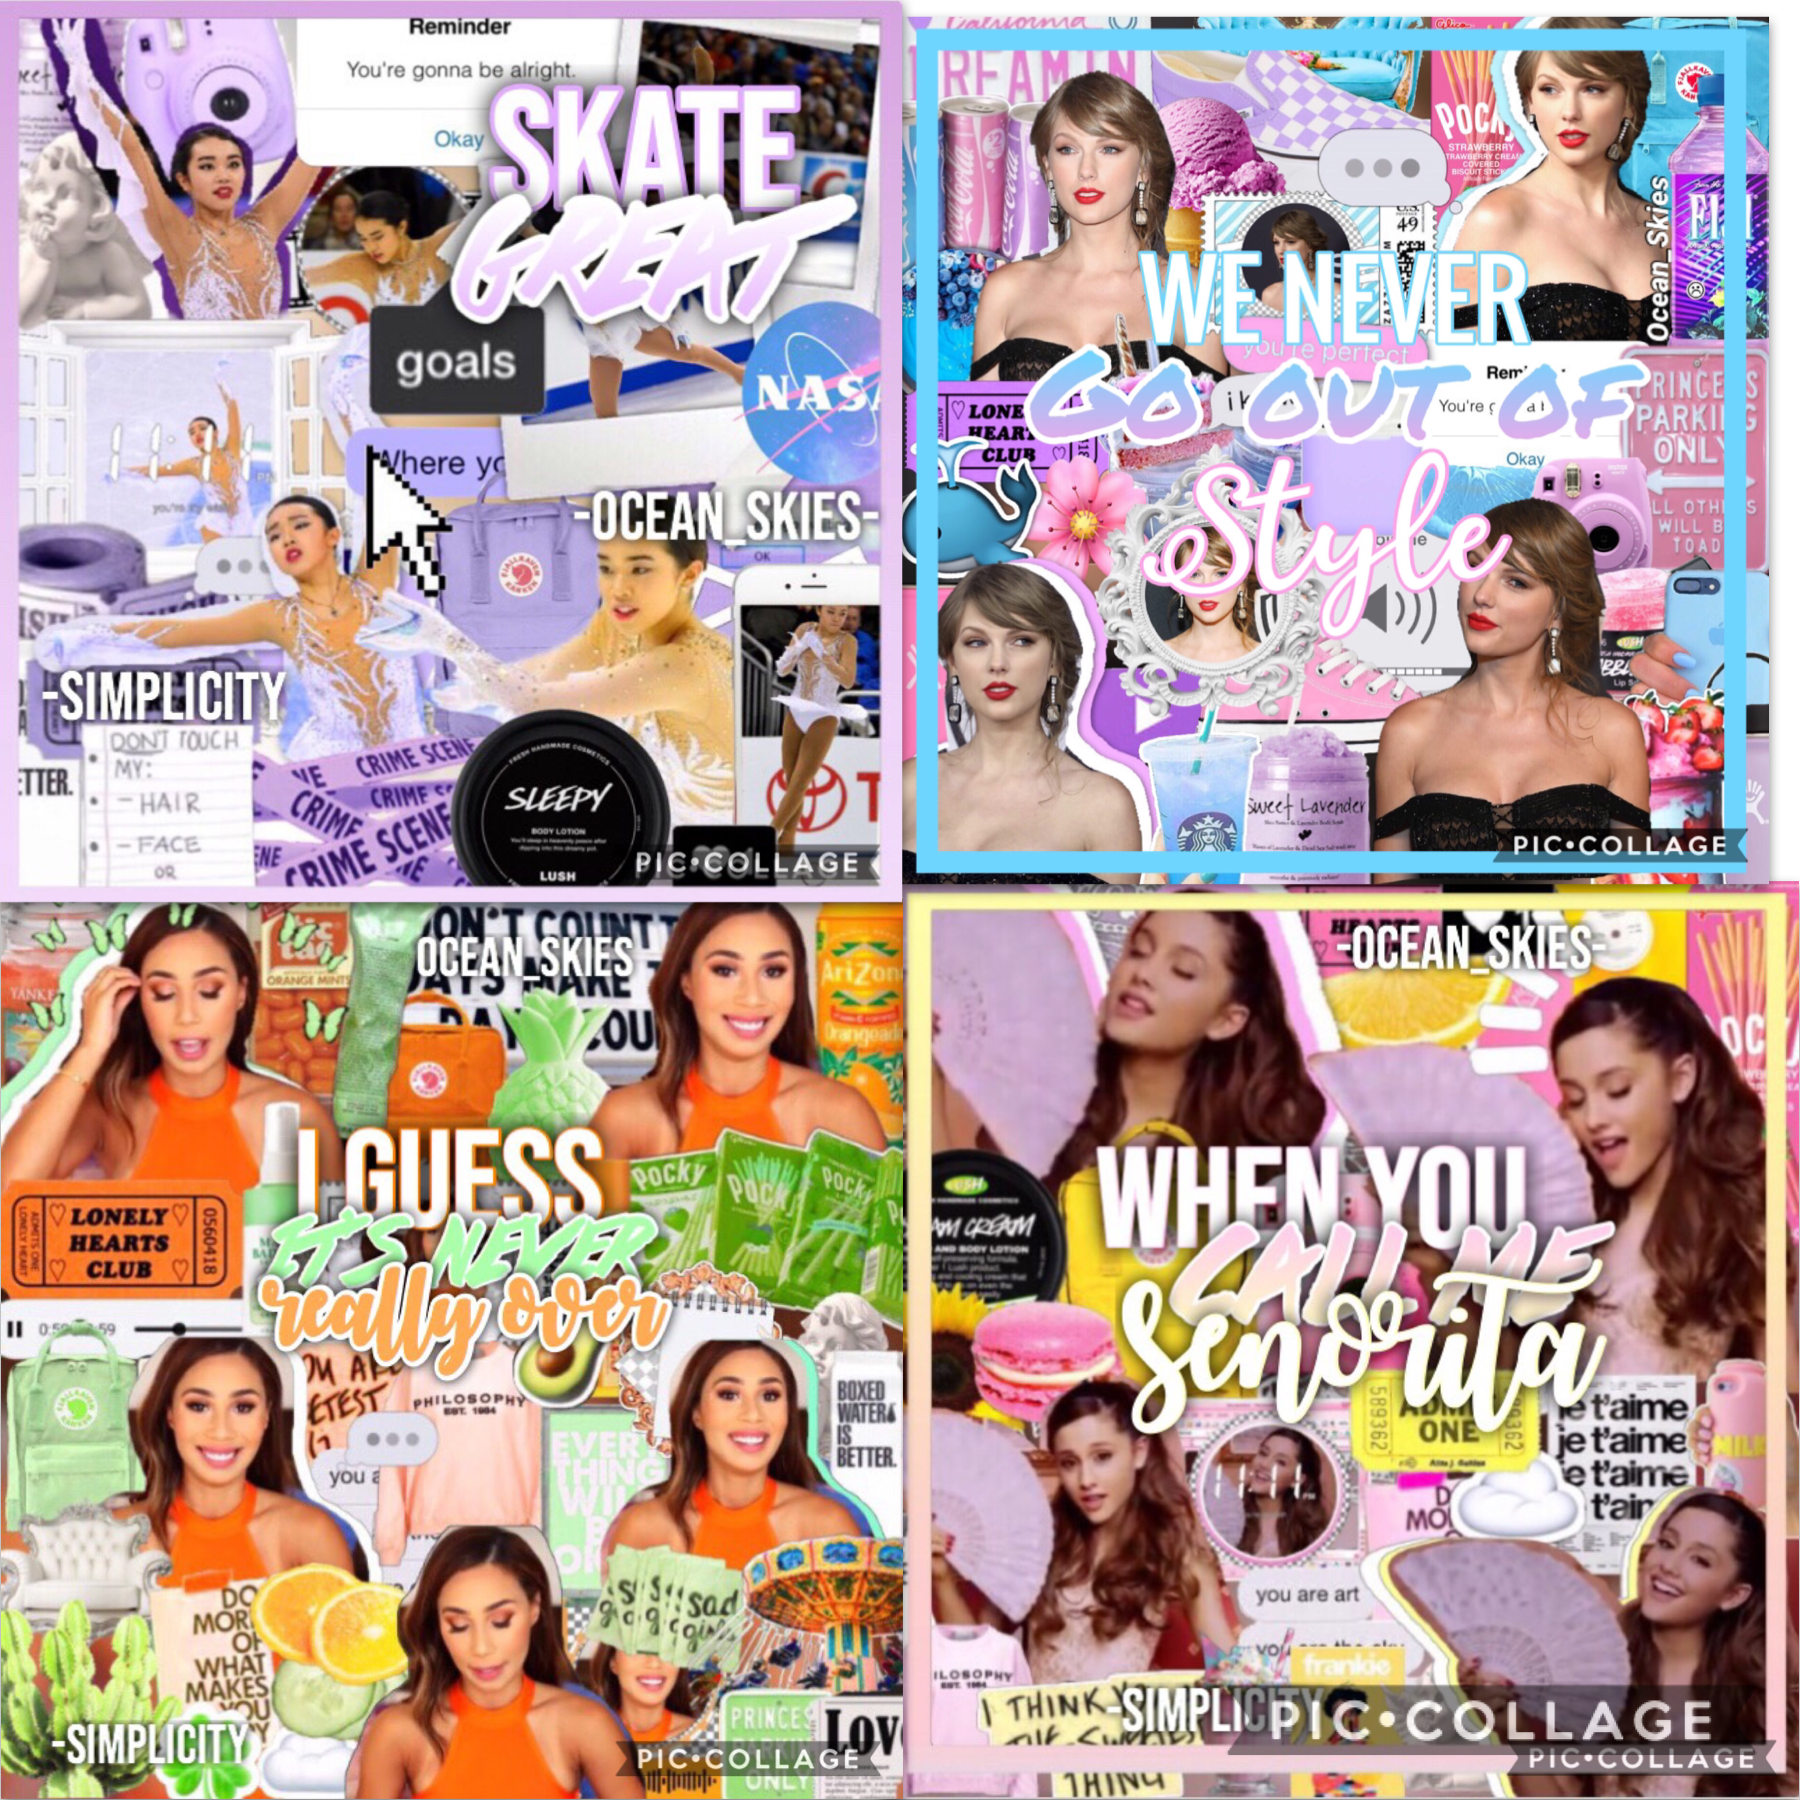 TAP
okay here’s a ton of collabs w/ -simplicity! she did the text on almost all of the except the taylor swift one and i’m not sure why her name isn’t on it. these weren’t all at the same time obvs so some are better than others 